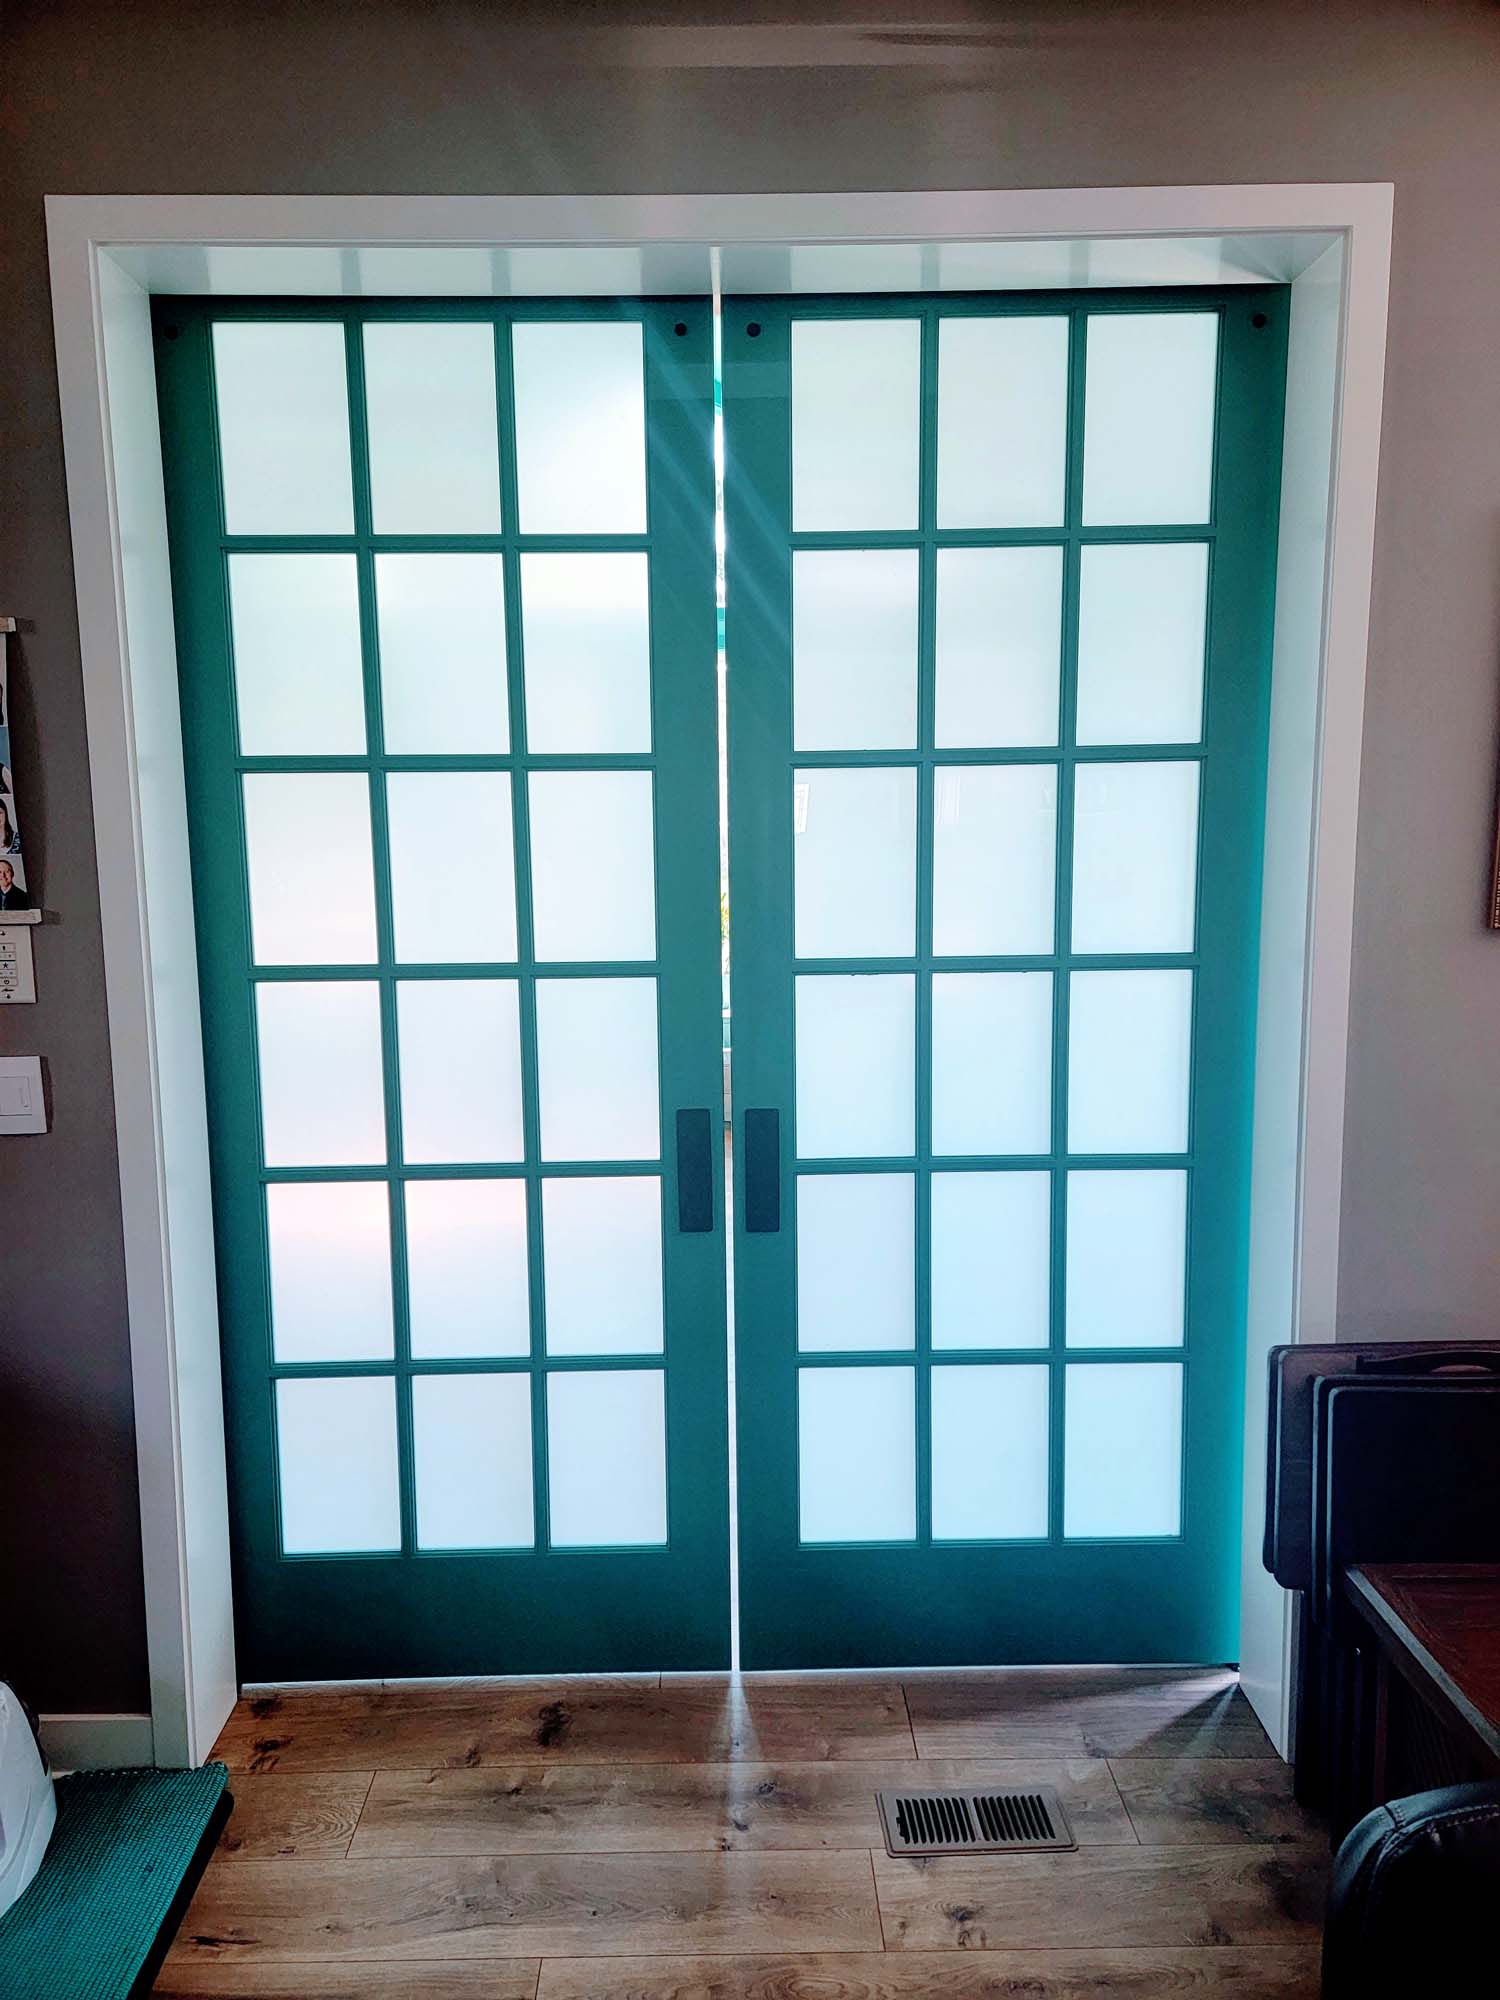 18 Lite frosted glass track doors for privacy to existing home